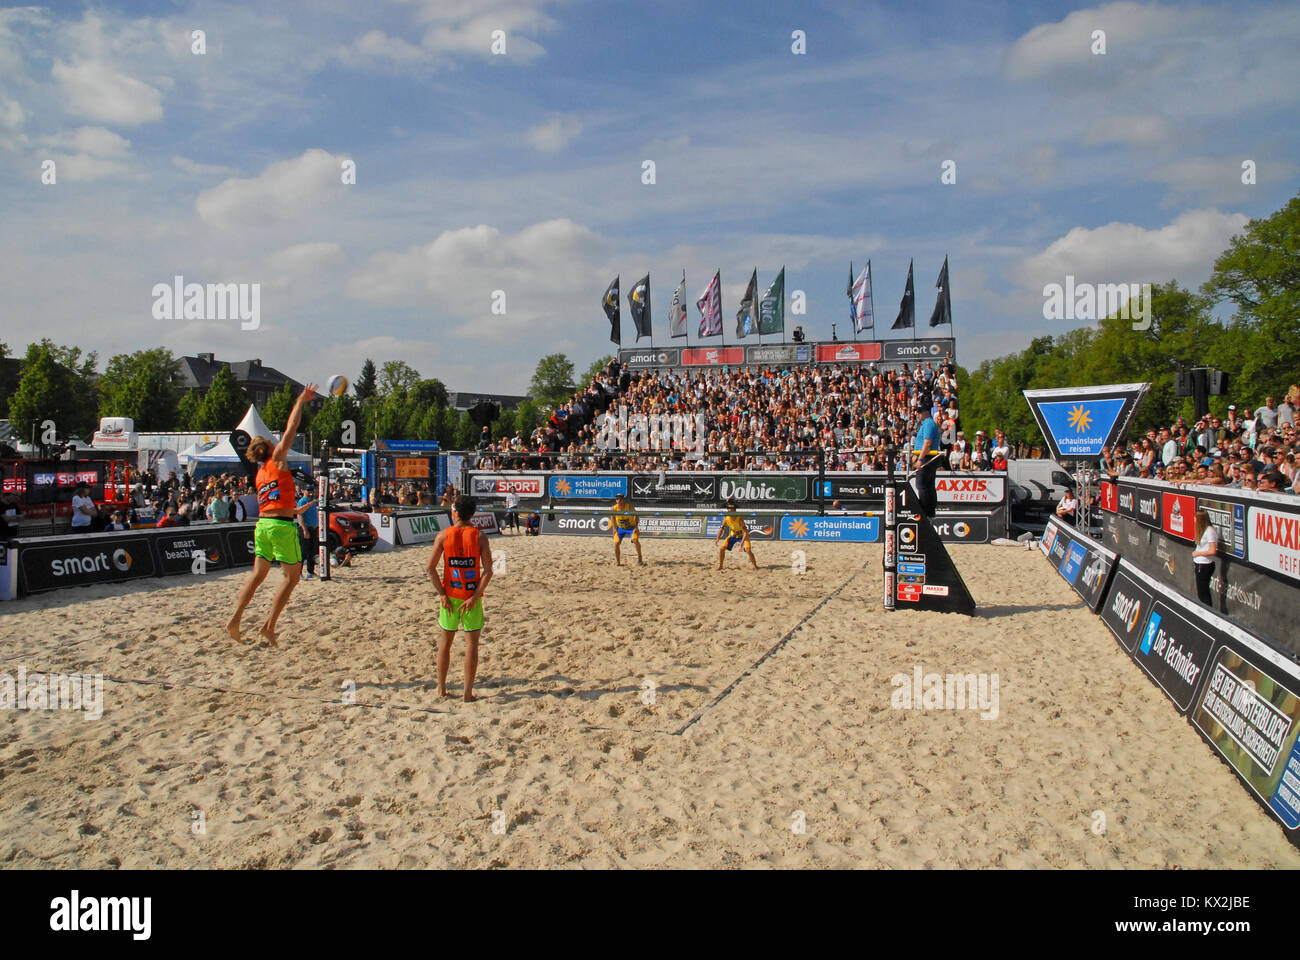 Münster, Germany - May 6, 2017: Smart Beach Tour event Stock Photo